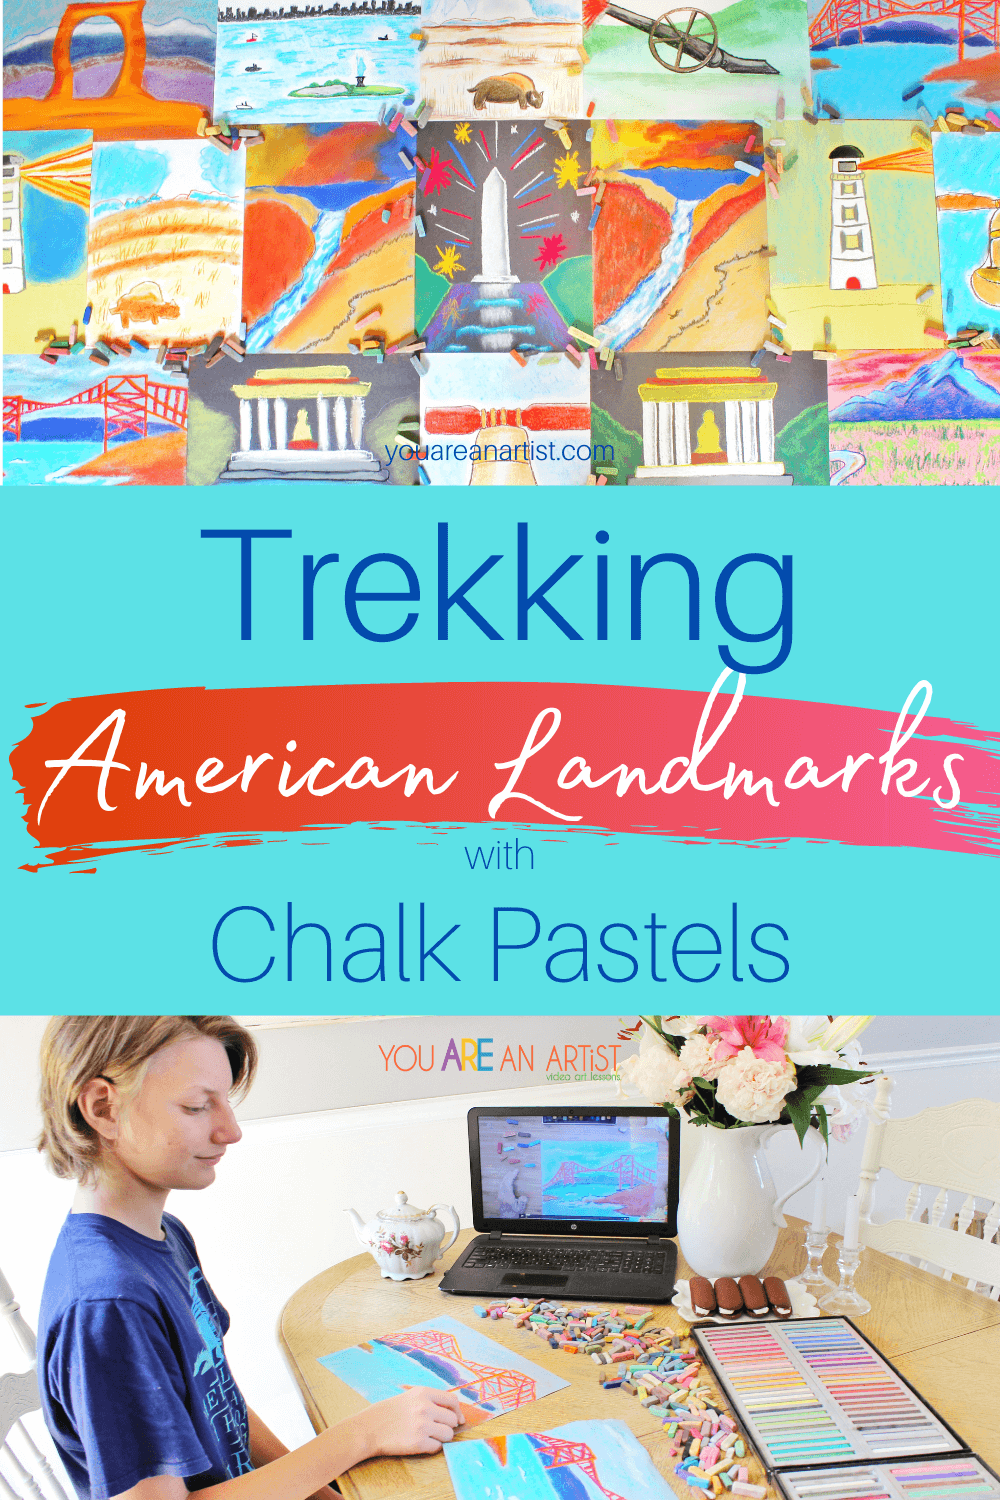 
Trekking American Landmarks with Chalk Pastels: Do you dream of trekking America's landmarks with your kids? Let Nana take you and your children on a trip around our great United States without leaving the comforts of your home. Trekking American landmarks with chalk pastels are as easy as walking to your kitchen table, setting out your chalk pastels, and a pack of construction paper. Nana will do the rest. #YouAREAnArtist #chalkpastels #Americanlandmarks #Americanlandmarksartlessons #TrekkingAmericanlandmarks #TrekkingAmericanlandmarkswithchalkpastels #Americanlandmarksvideoartlessons #famousAmericanlandmarks #USlandmarkactivity
